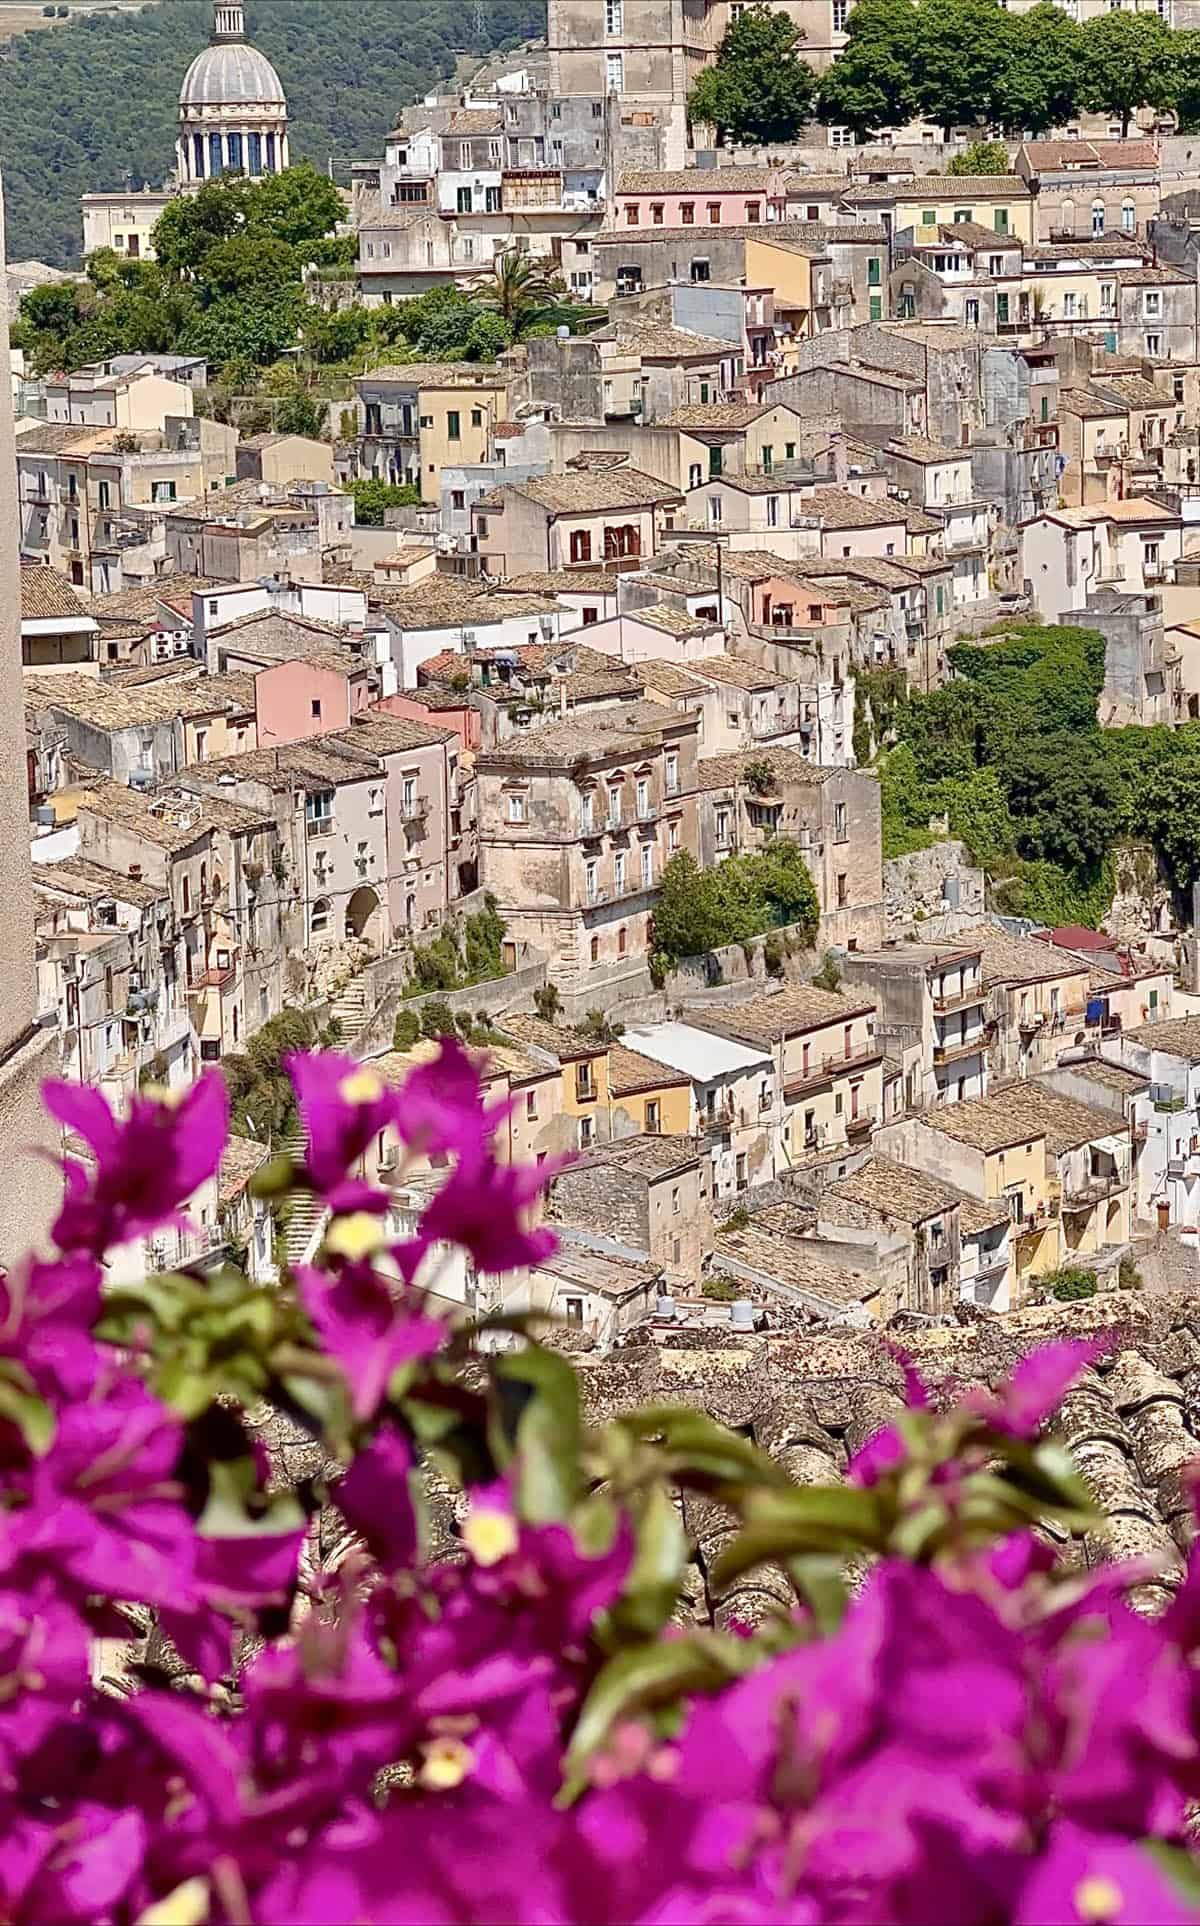 An image of the skyline of Ragusa Ibla as seen from Ragusa Superior. Bougainvillea frame the buildings in the bottom left corner of the image.